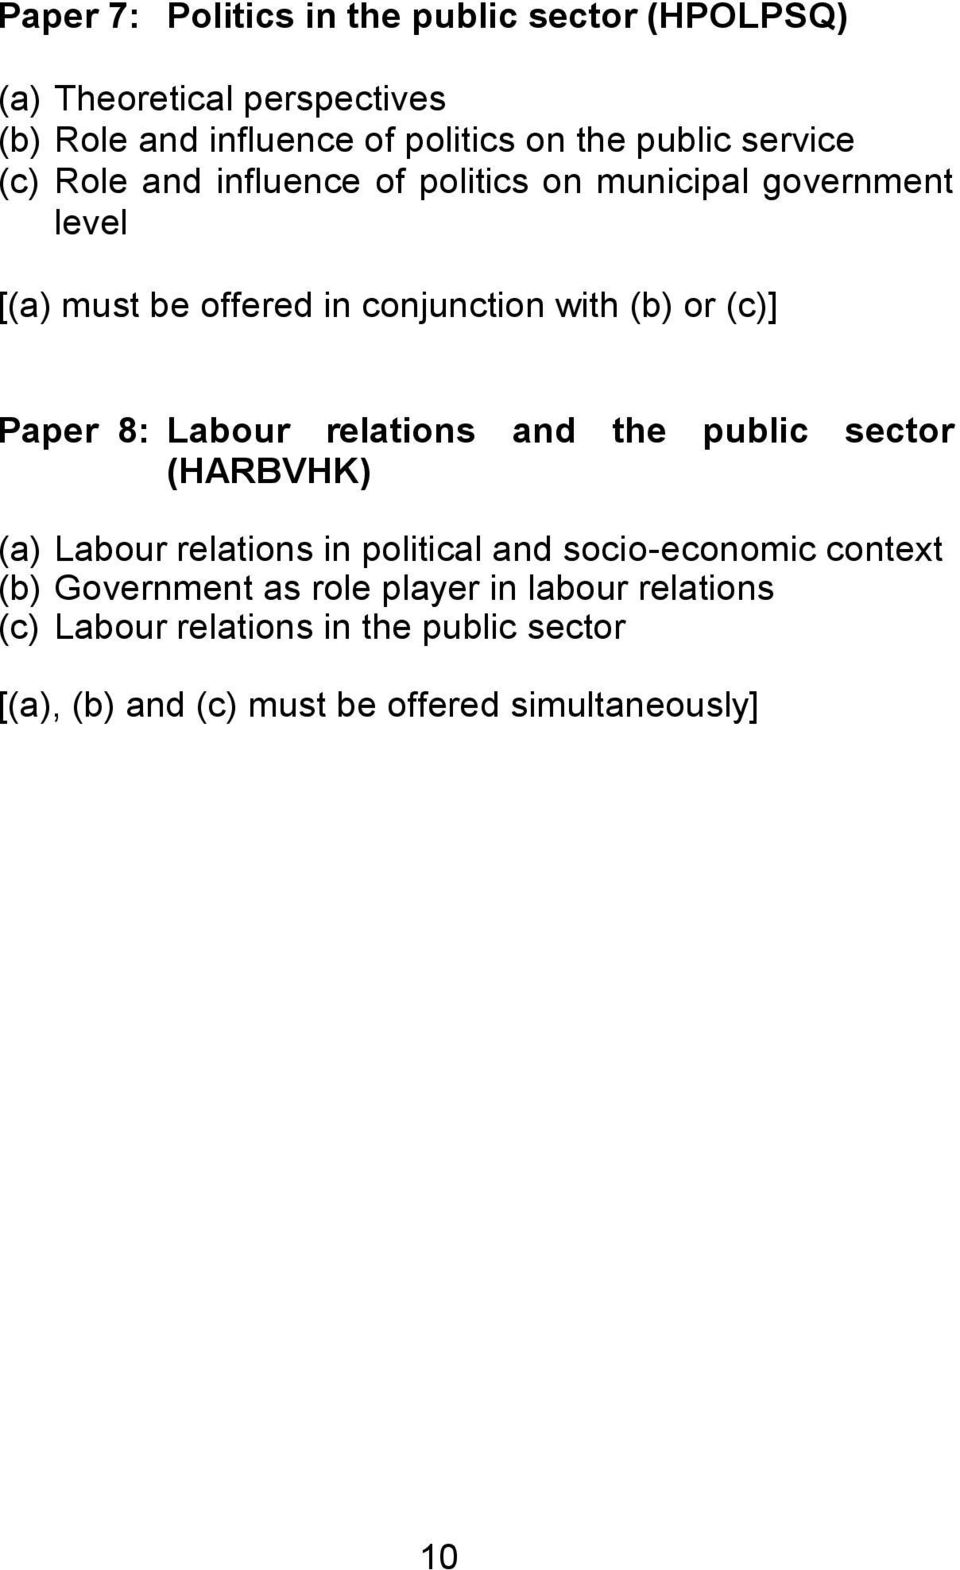 Paper 8: Labour relations and the public sector (HARBVHK) (a) Labour relations in political and socio-economic context (b)